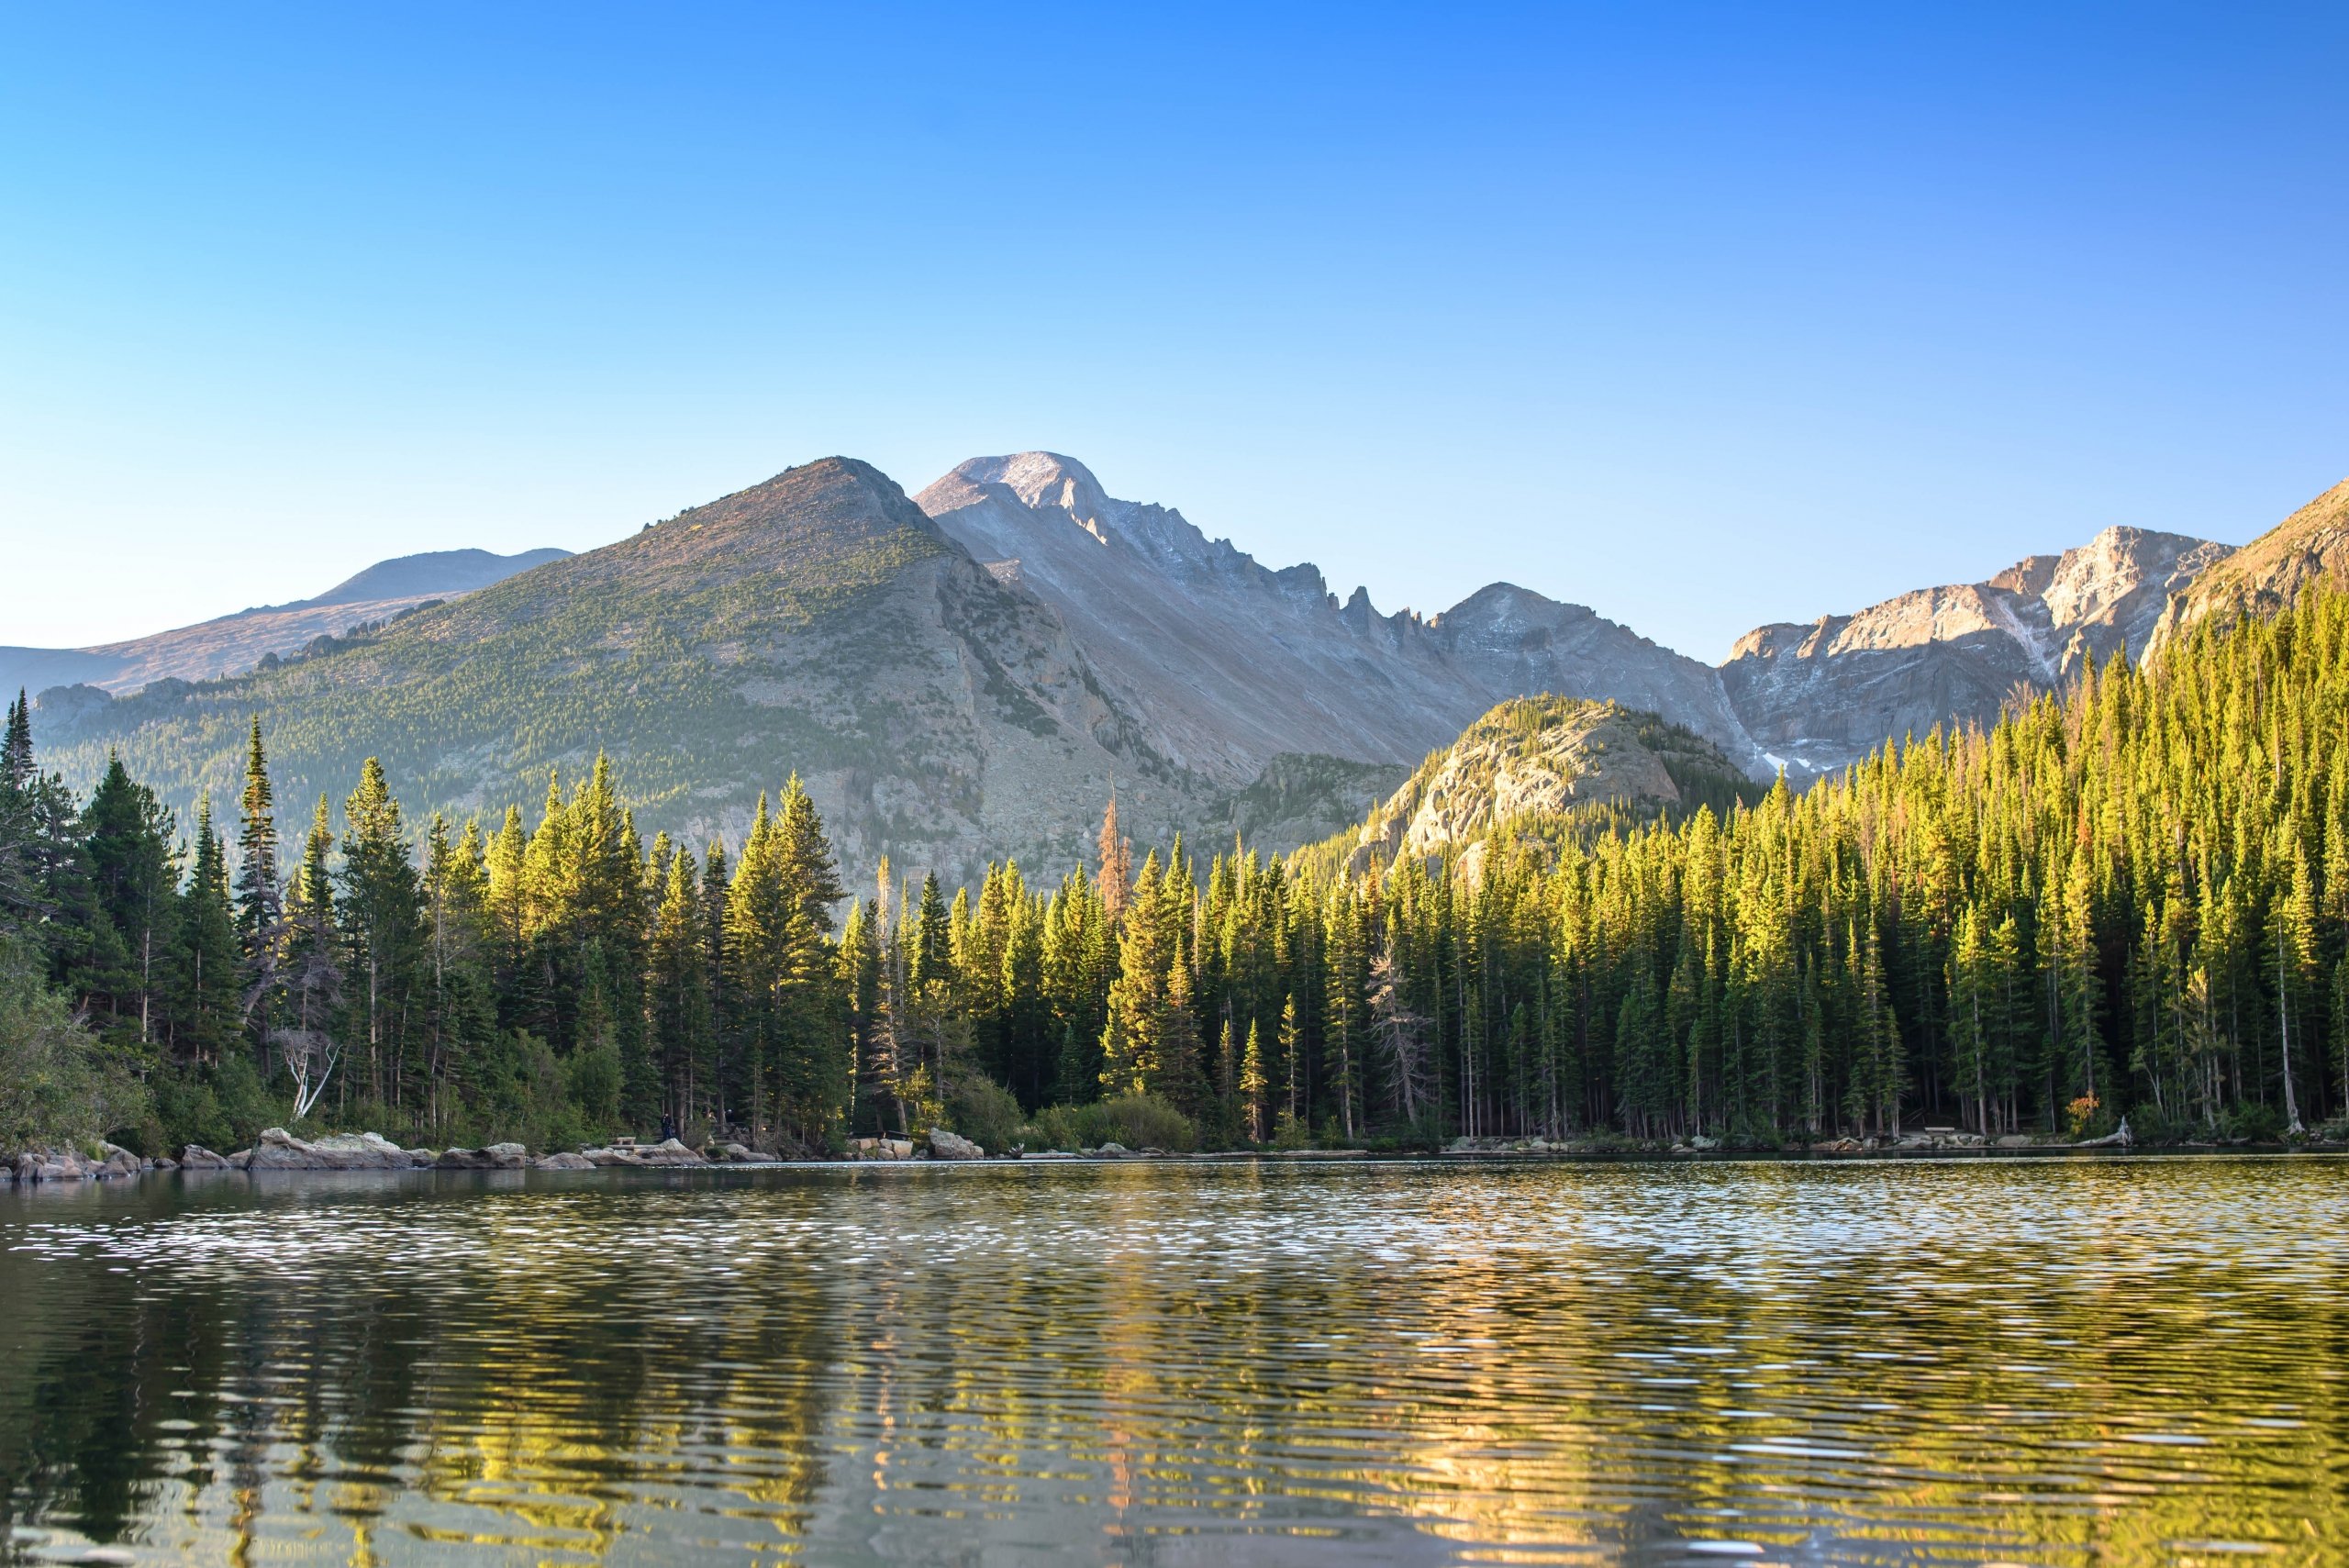 View of the Rocky Mountains in Colorado with a forest and lake